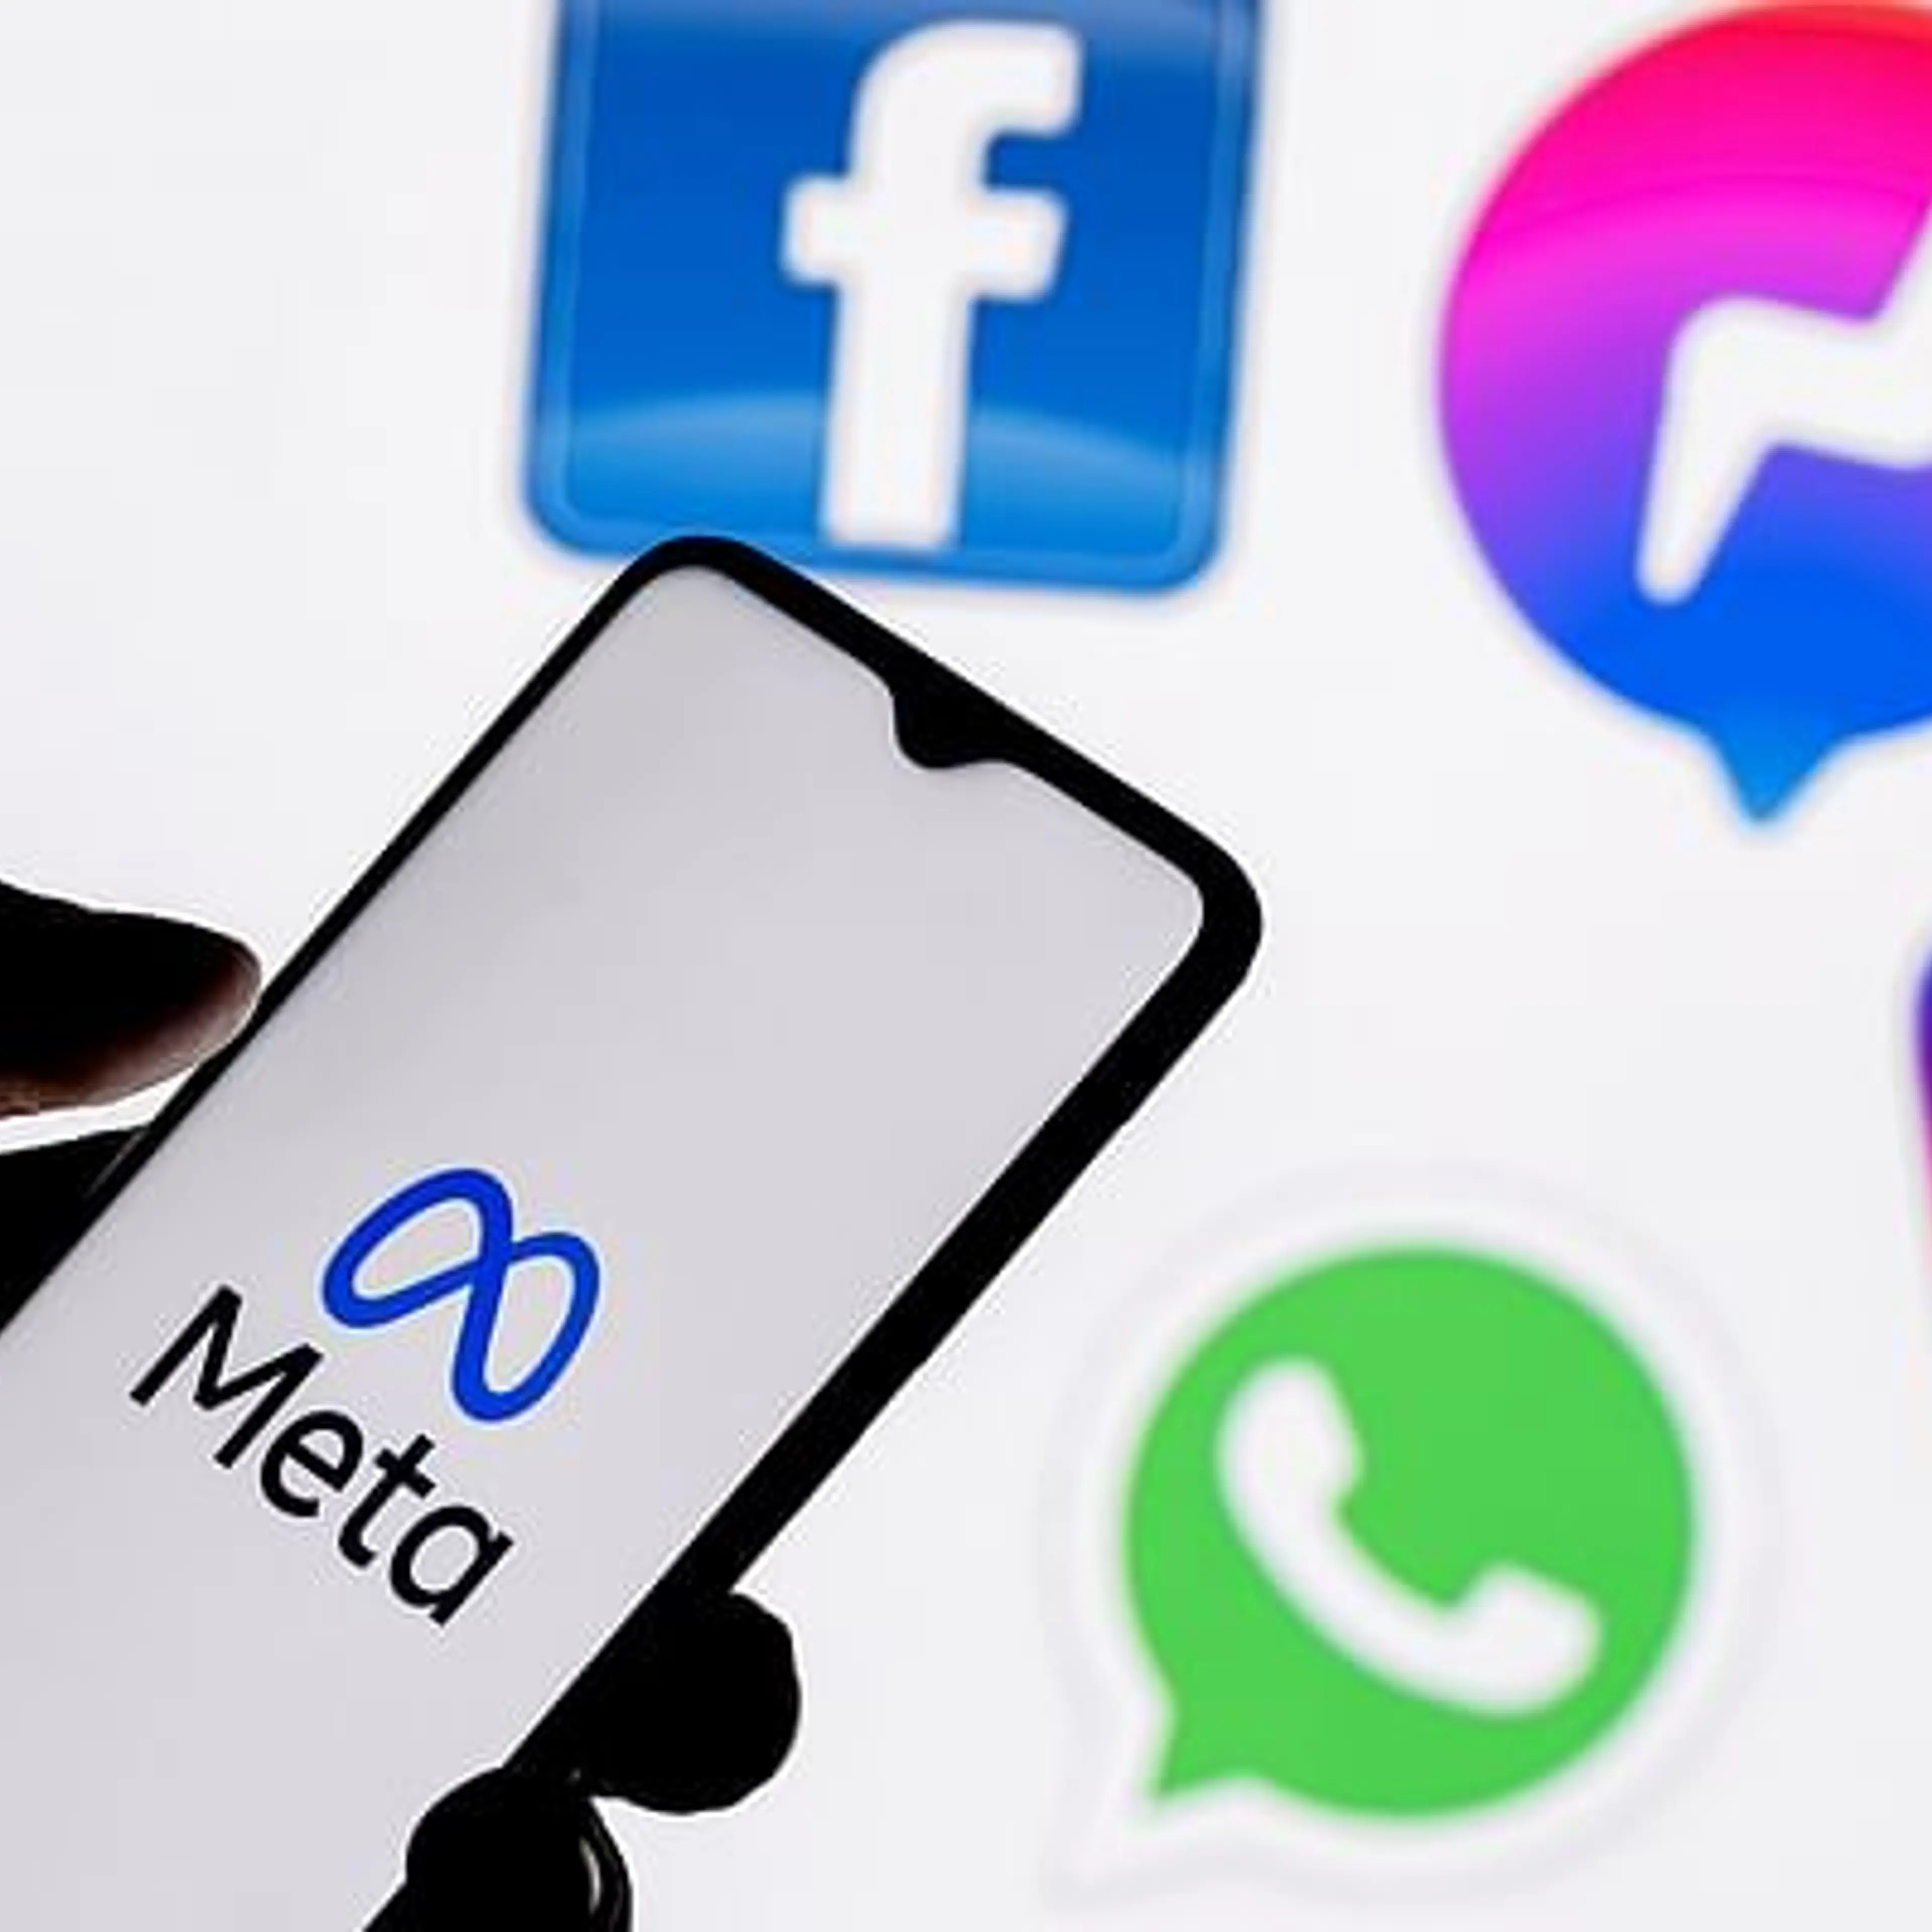 Meta rolls out AI chatbot for Facebook, WhatsApp, and Instagram users in India
